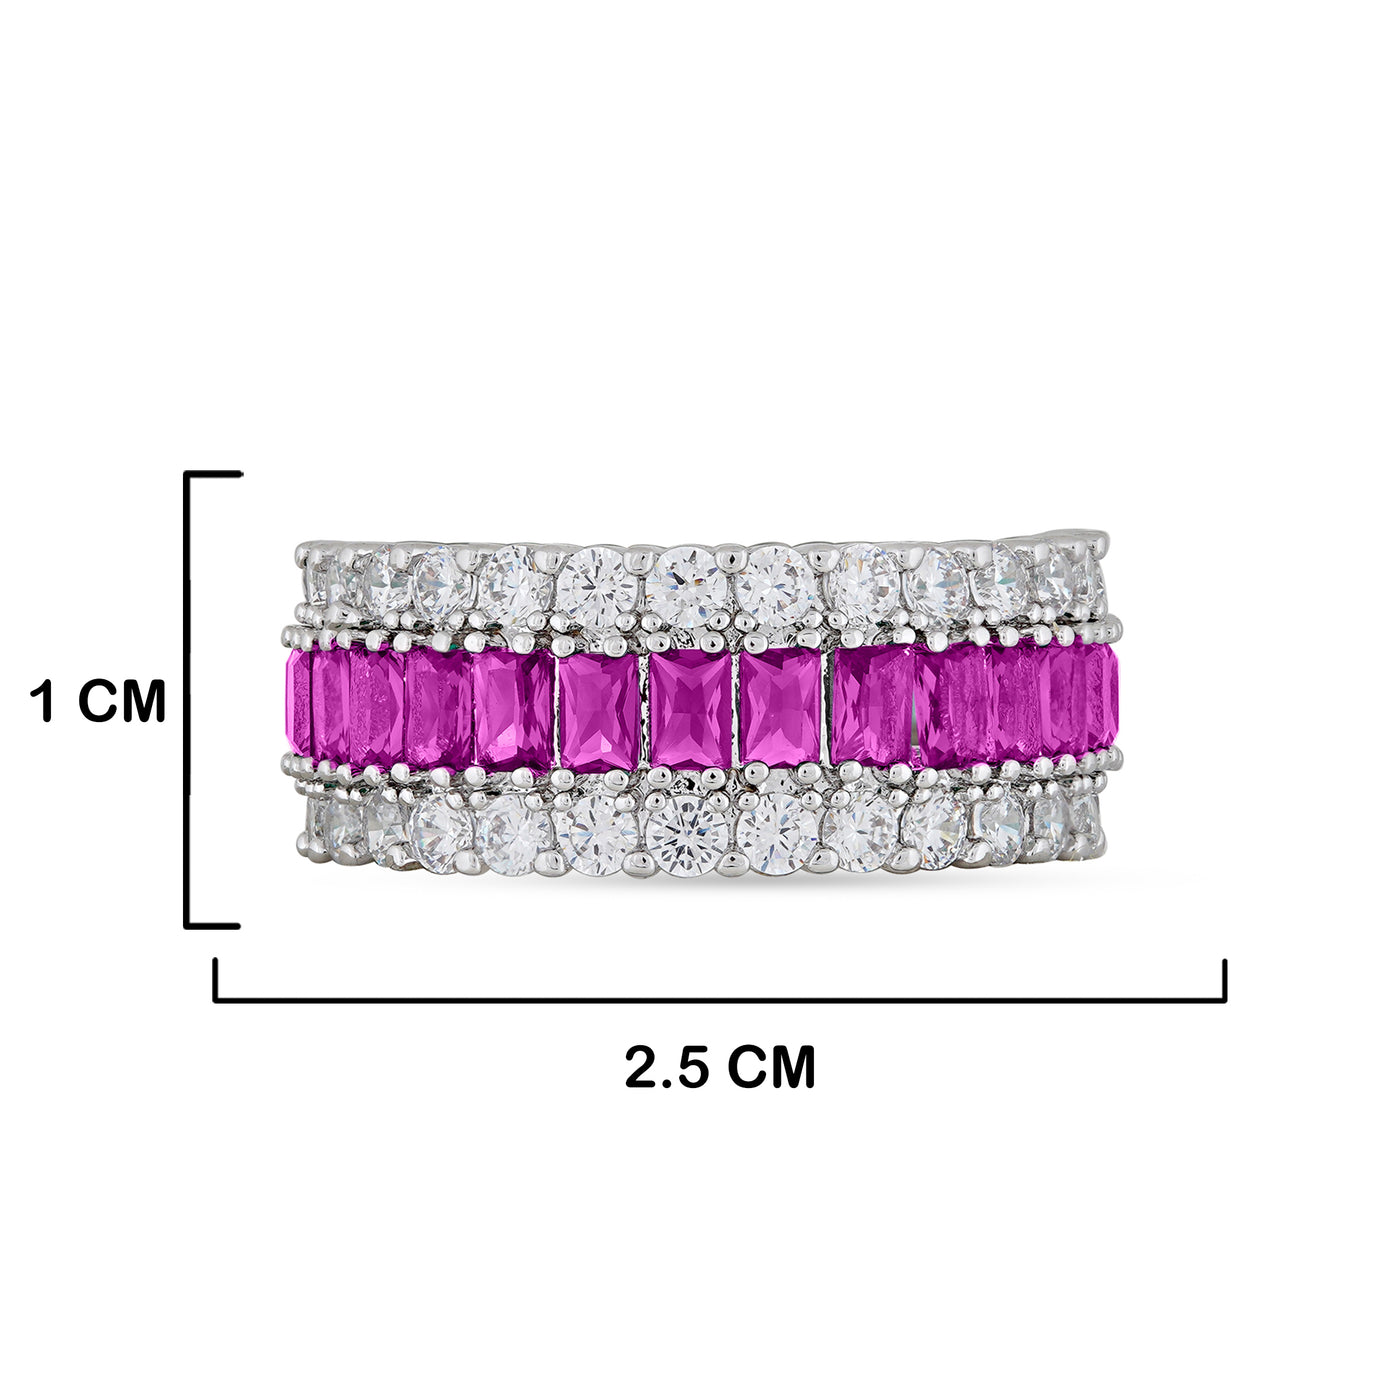 Magenta Cubic Zirconia Ring with measurements in cm. 1cm by 2.5cm.